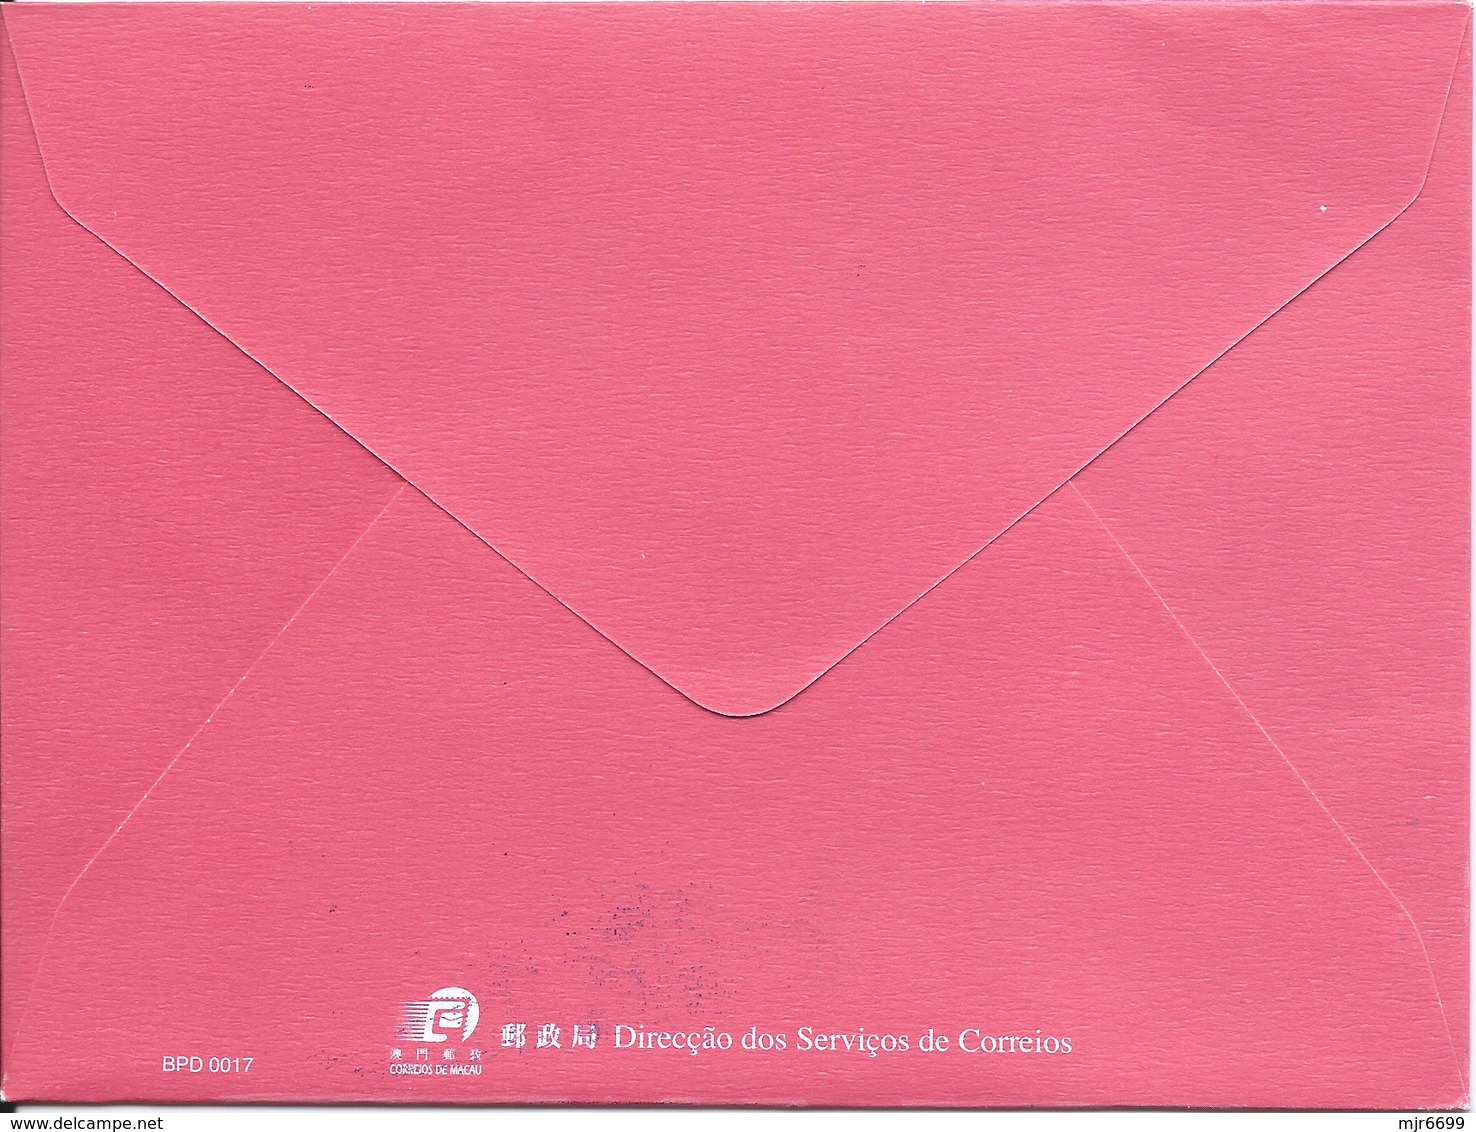 MACAU 2007 LUNAR YEAR OF THE PIG GREETING CARD & POSTAGE PAID COVER FIRST DAY USAGE - Ganzsachen